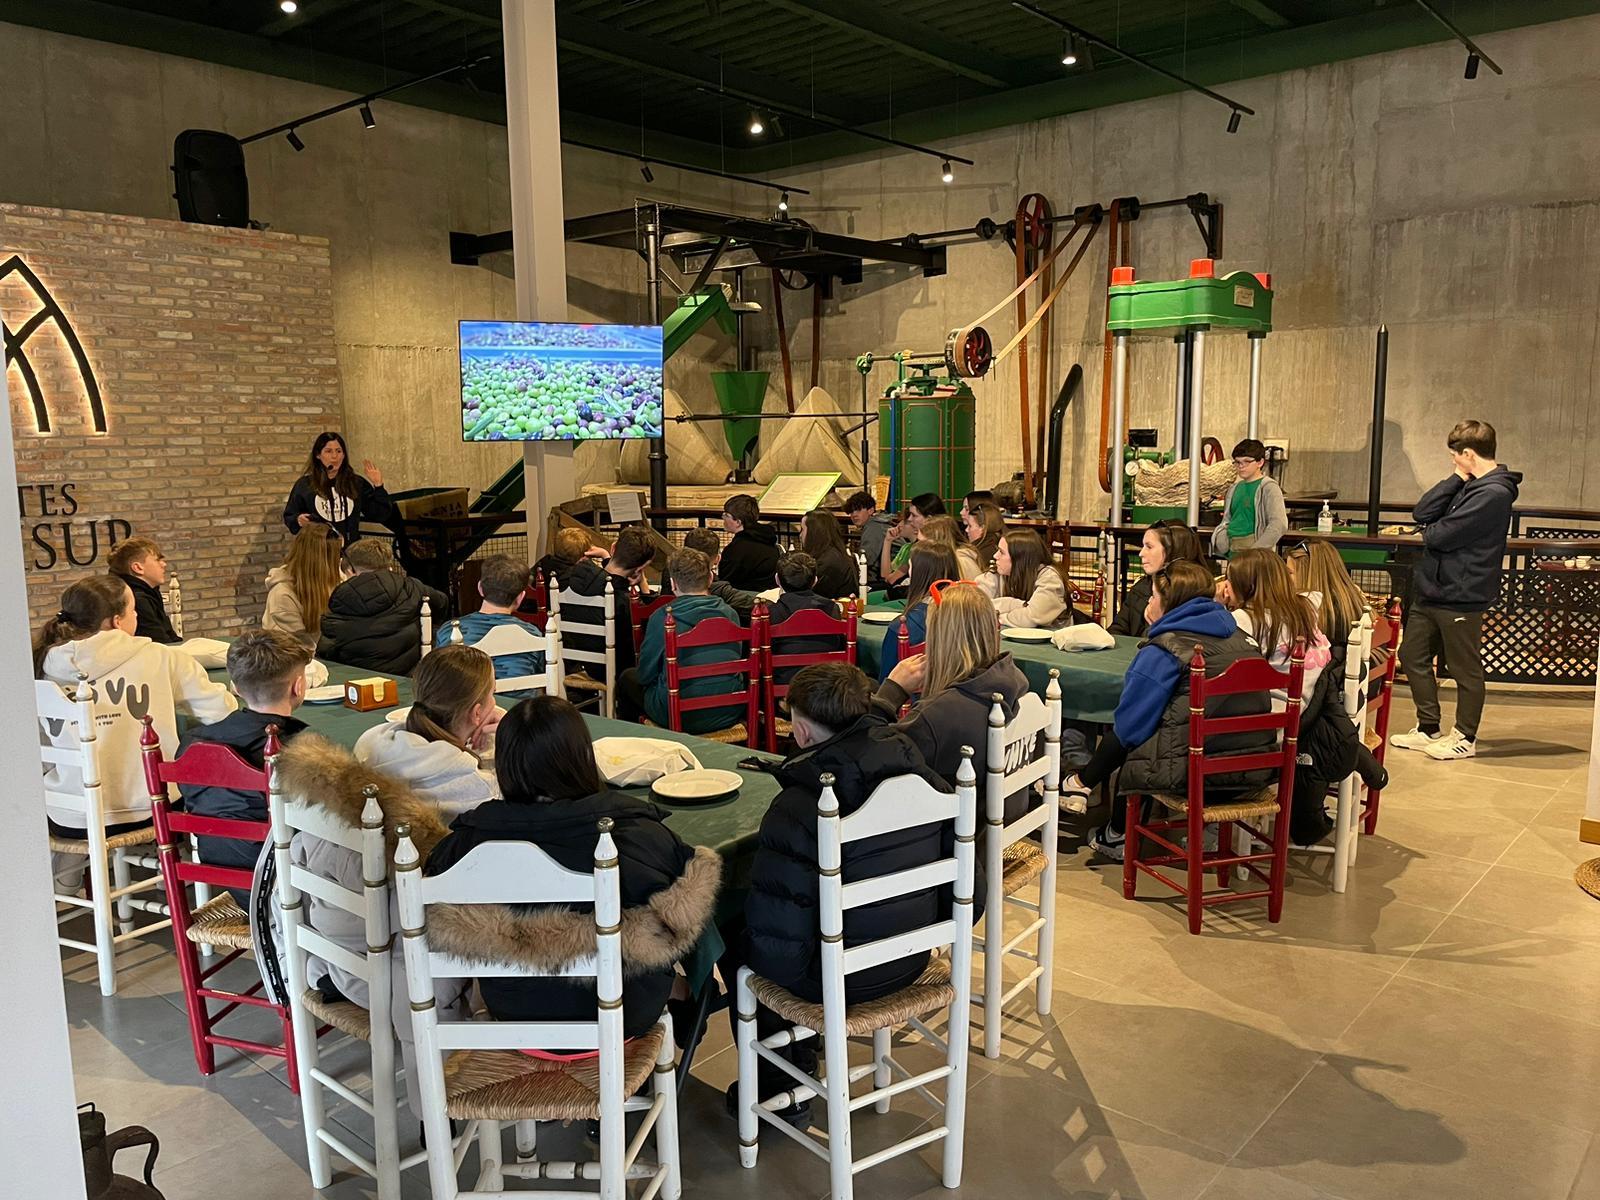 The students listen to a talk at the olive farm.